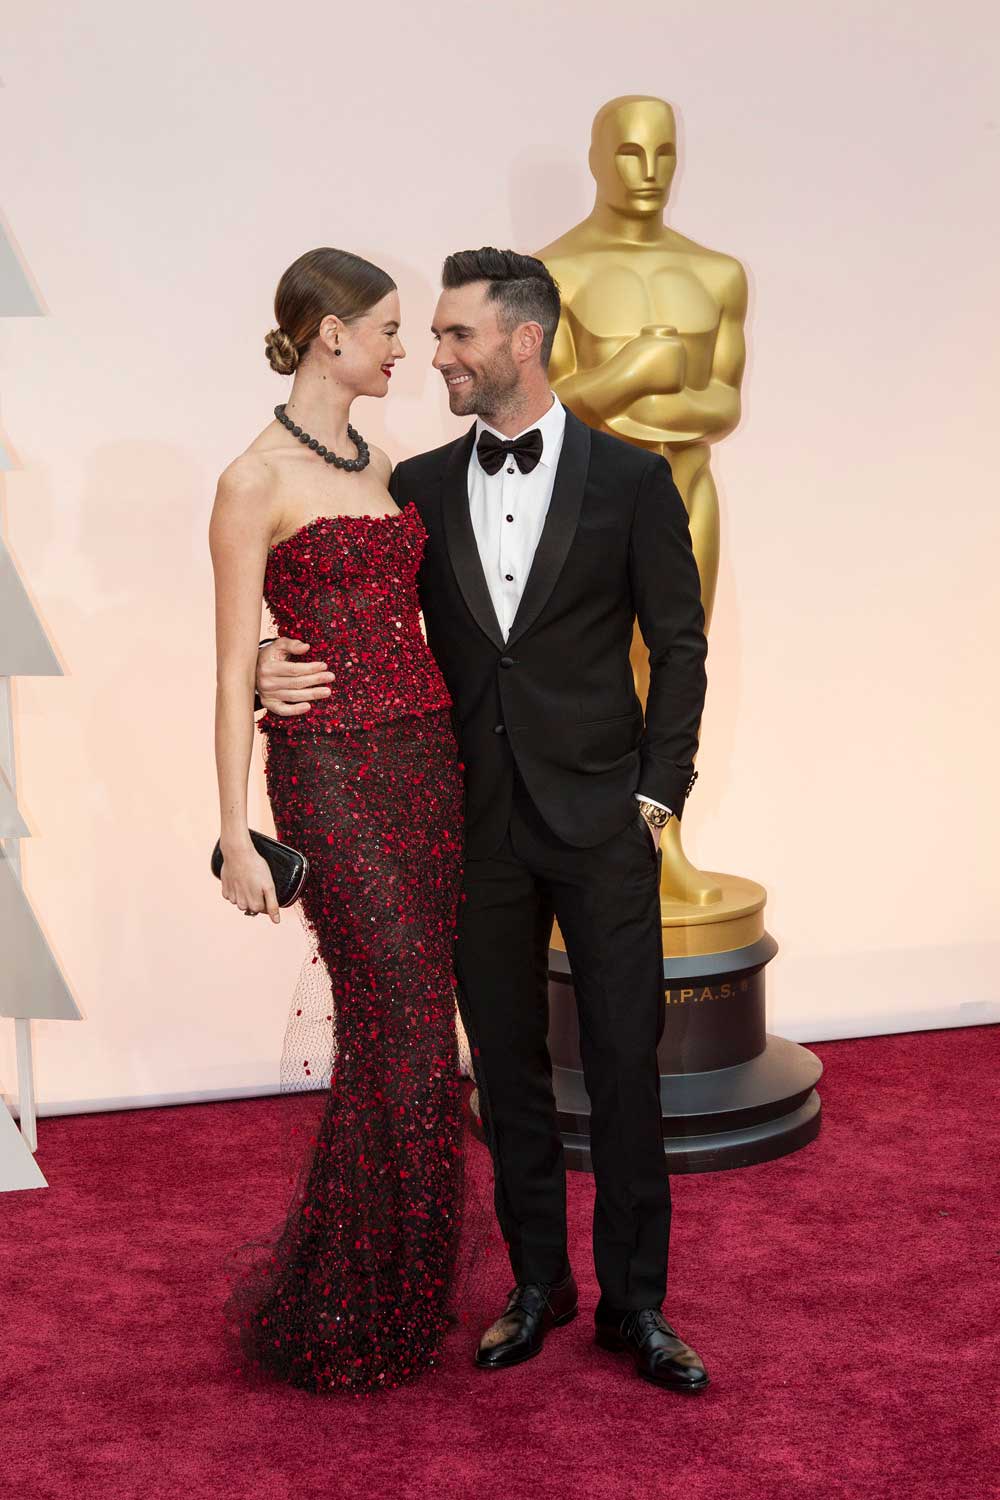 Photo of actors Behati Prinsloo and Adam Levine at the 2015 Oscars.